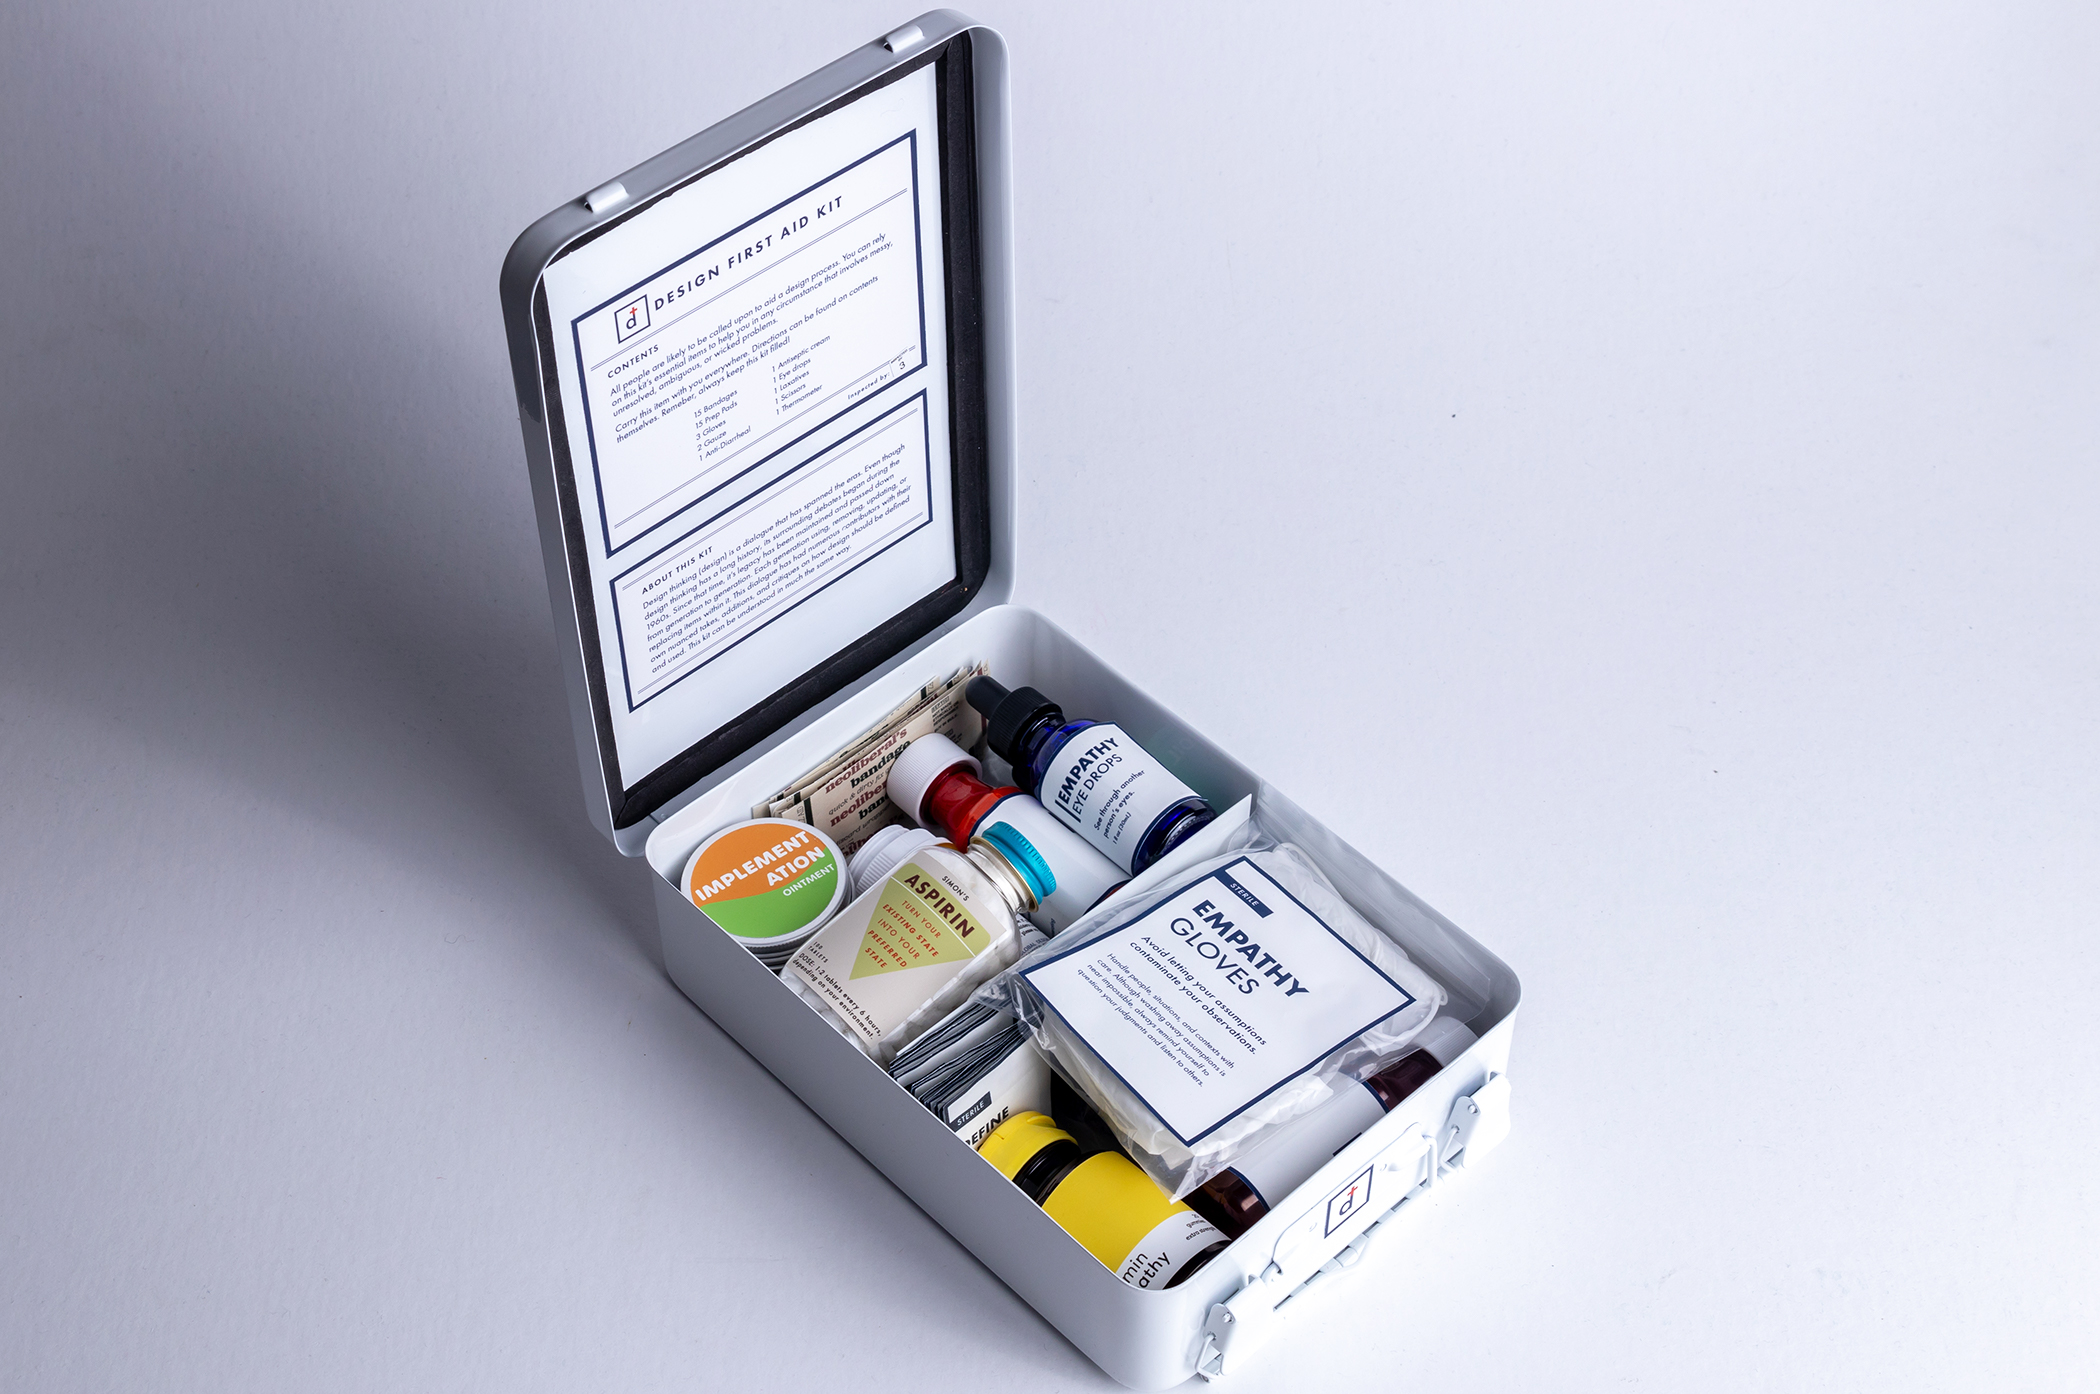 The interior of a first aid kit